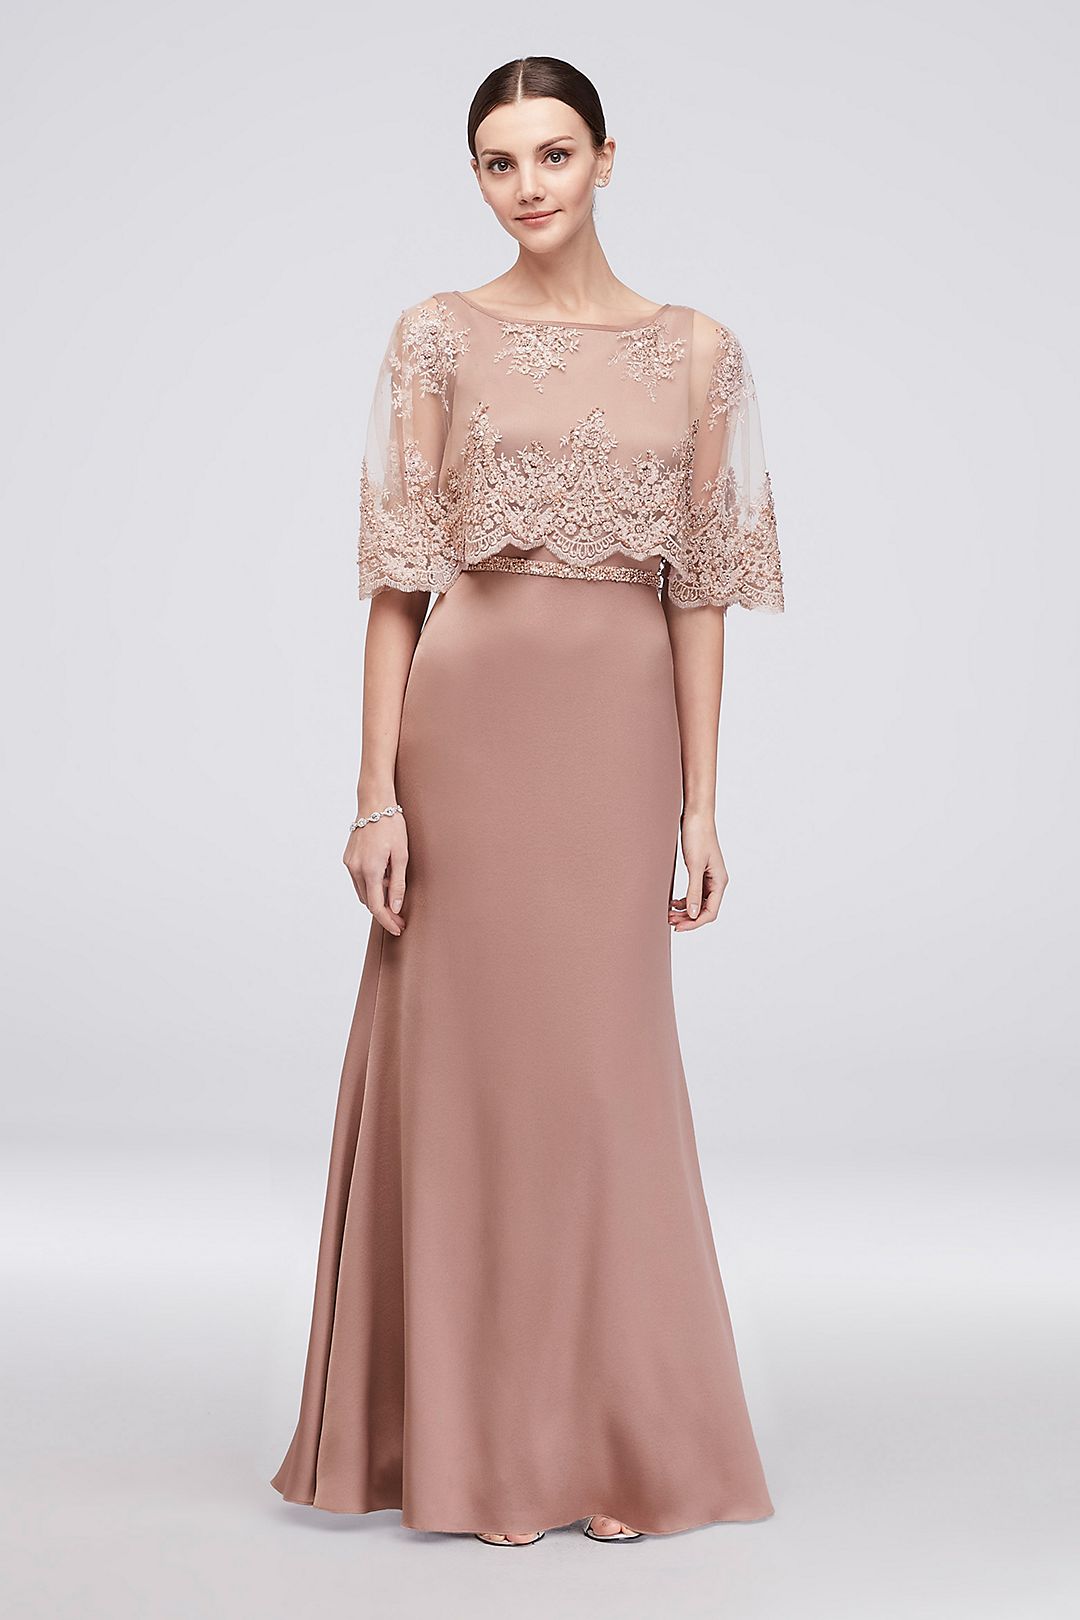 Satin Sheath Gown with Scalloped Lace Capelet Image 1